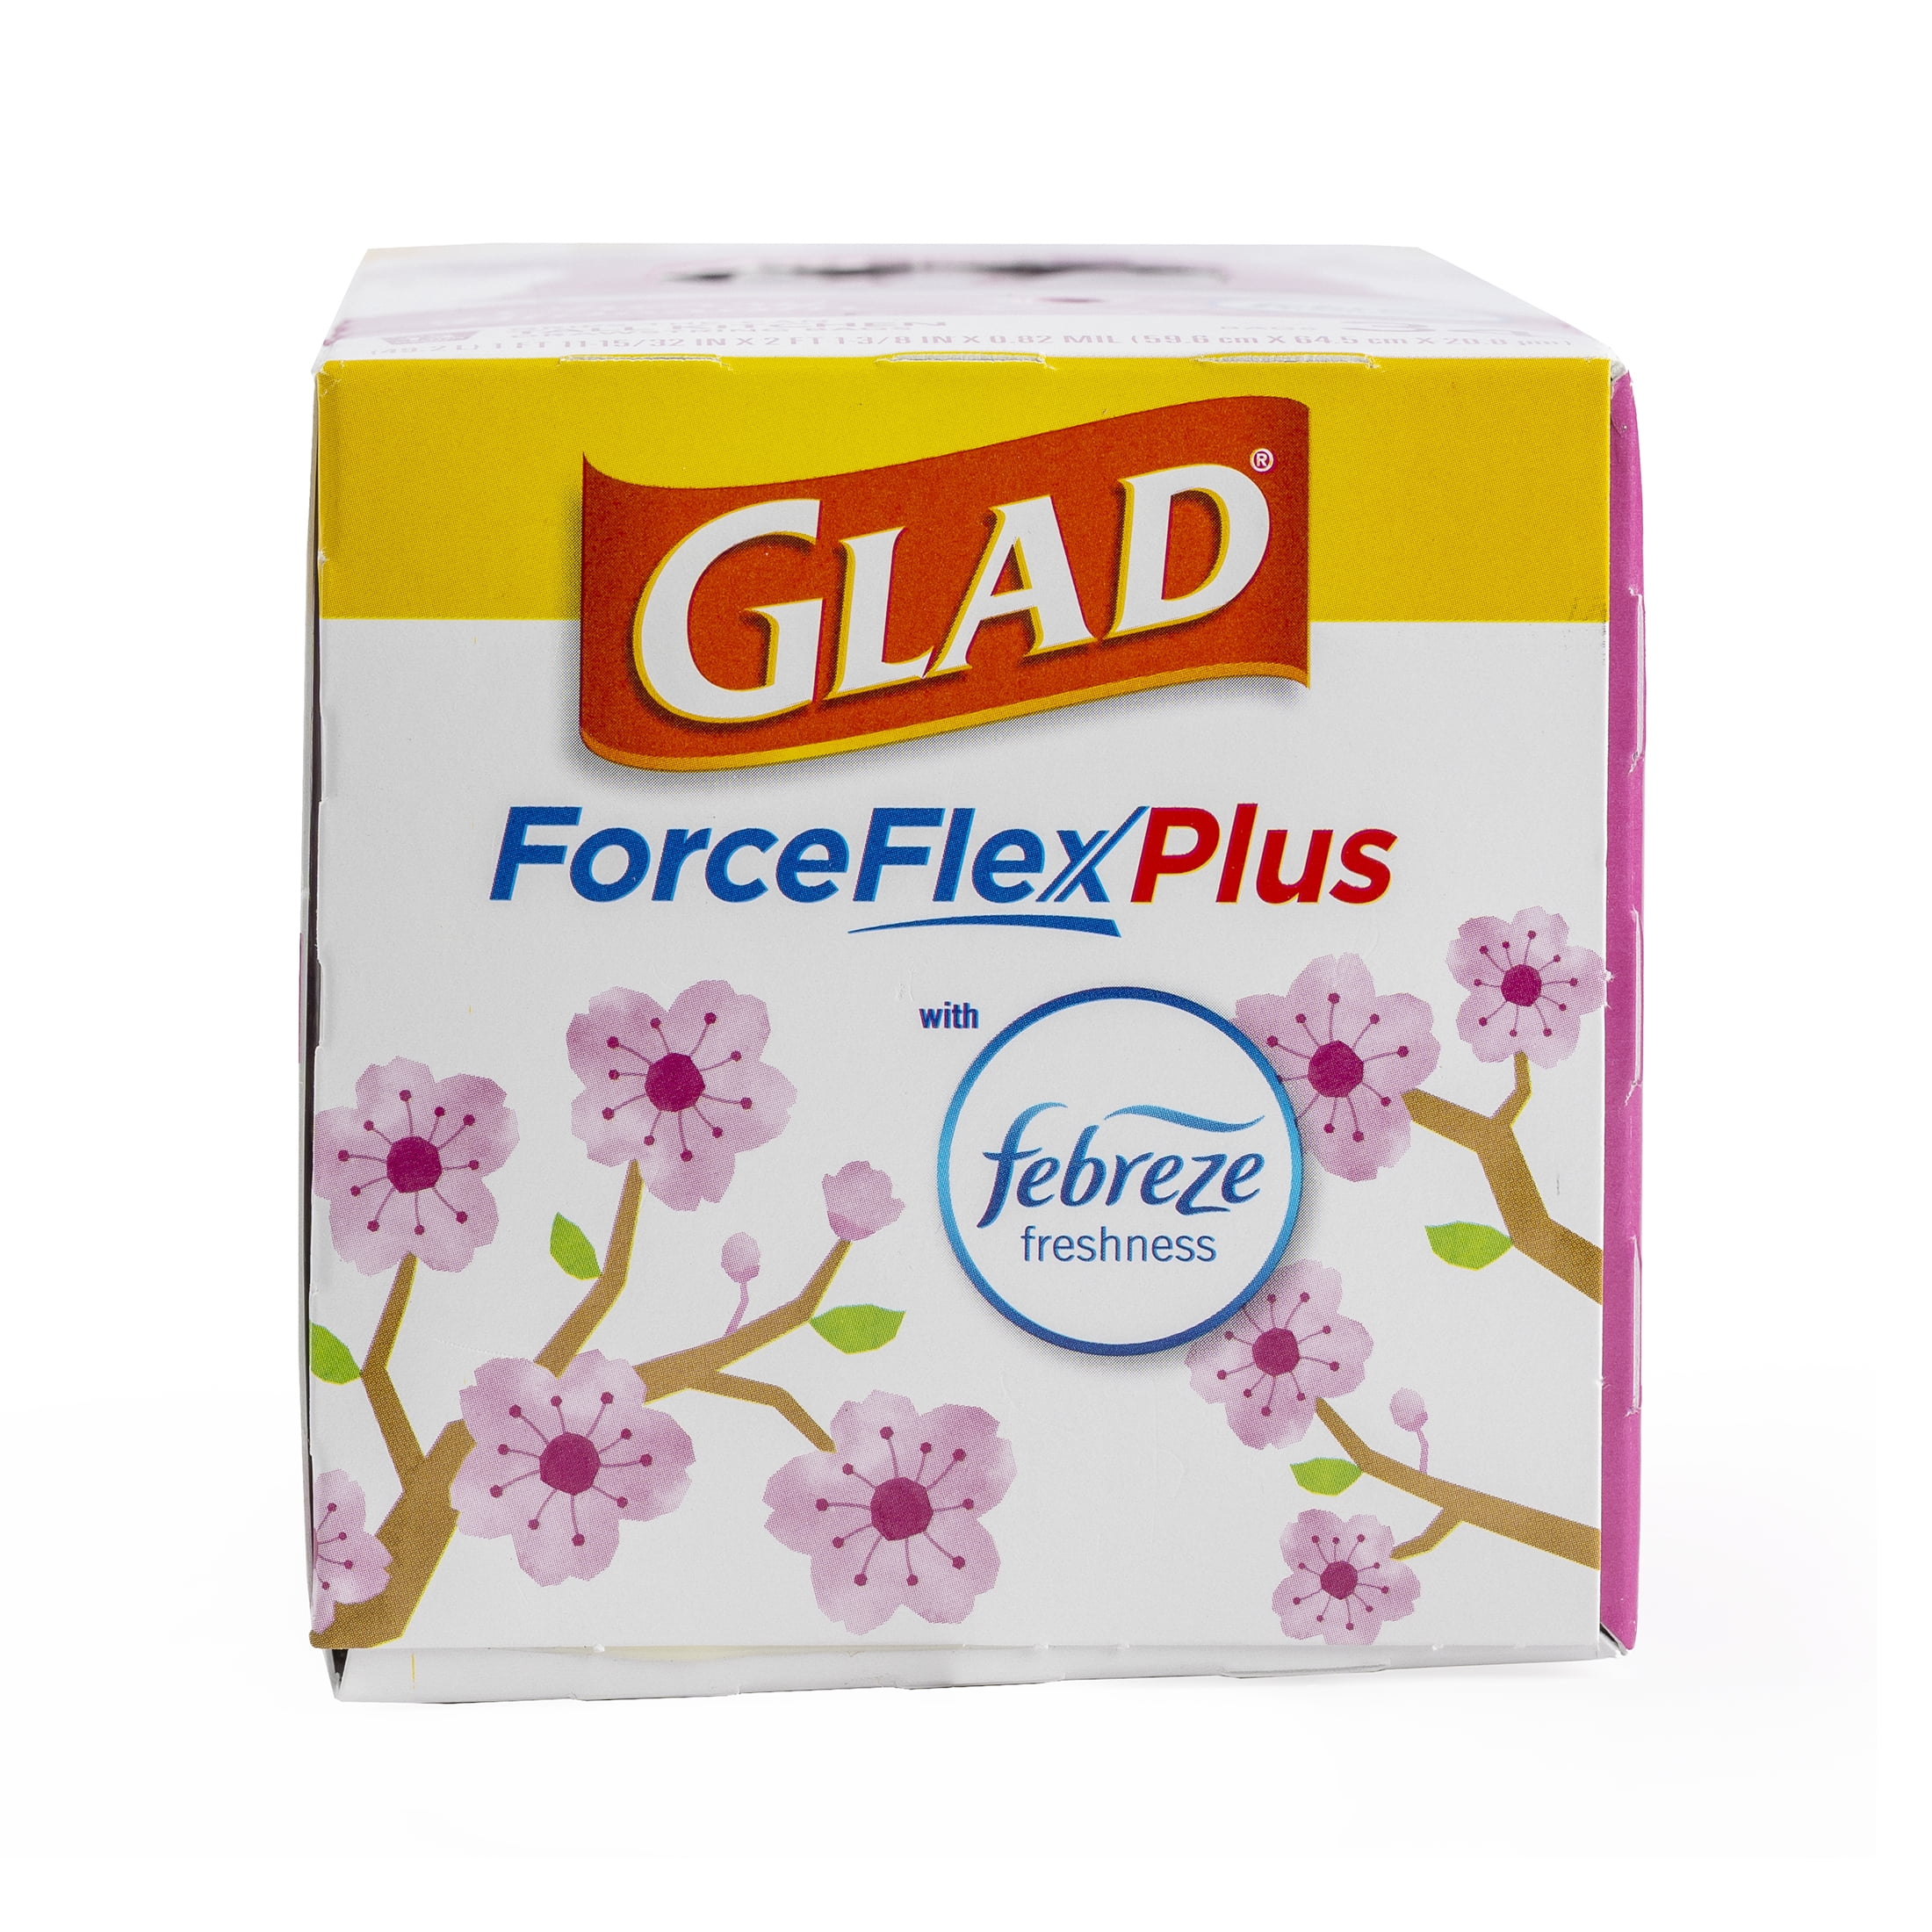 Glad Cherry Blossom Trash Bag Stock Photos and Pictures - 1 Images